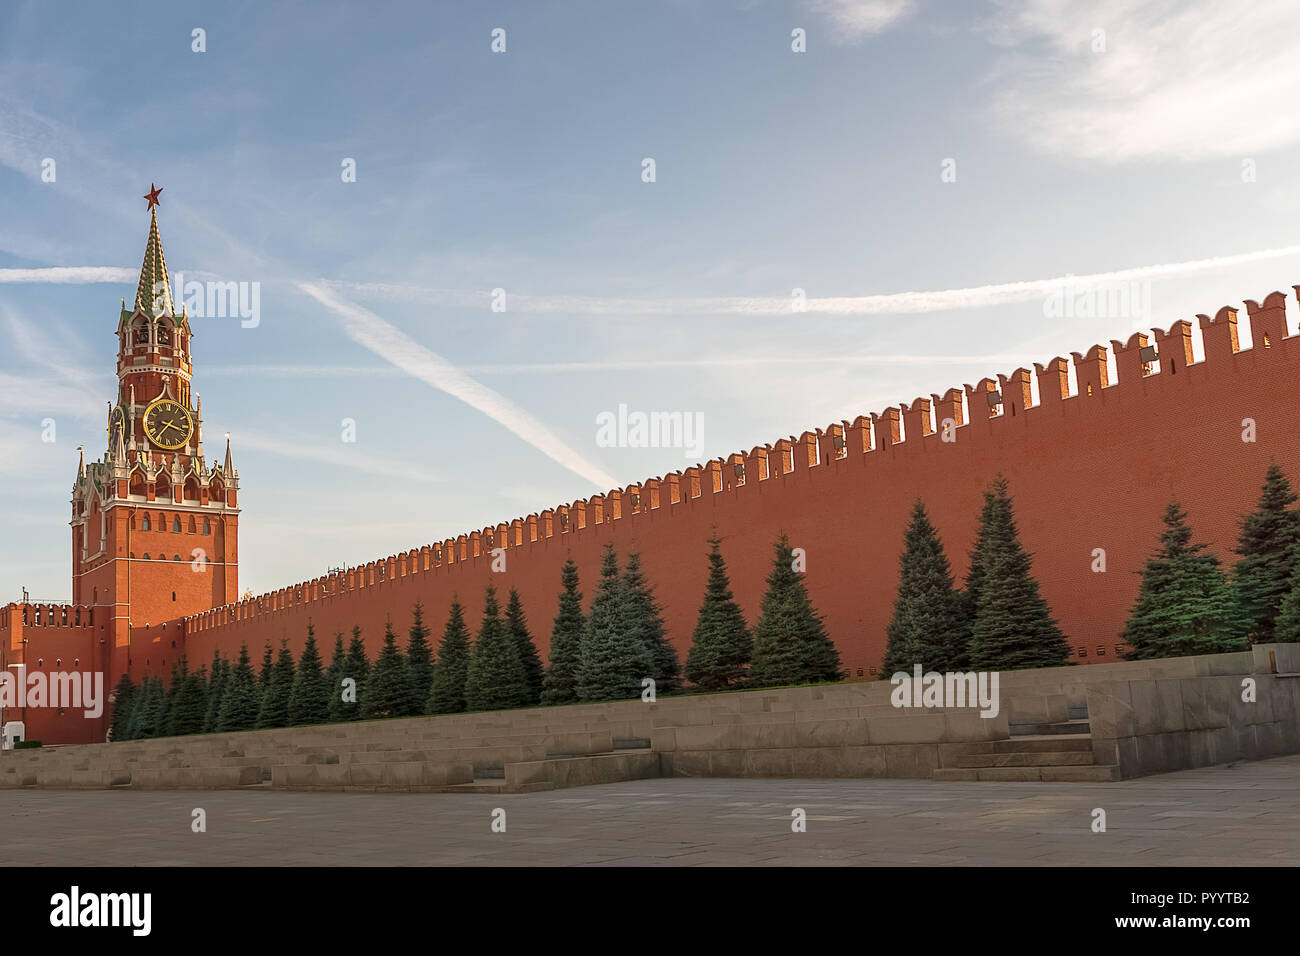 The Red Square and the Kremlin are the world famous historical objects of Moscow, Russia, and the official residence of the President of the Russian F Stock Photo